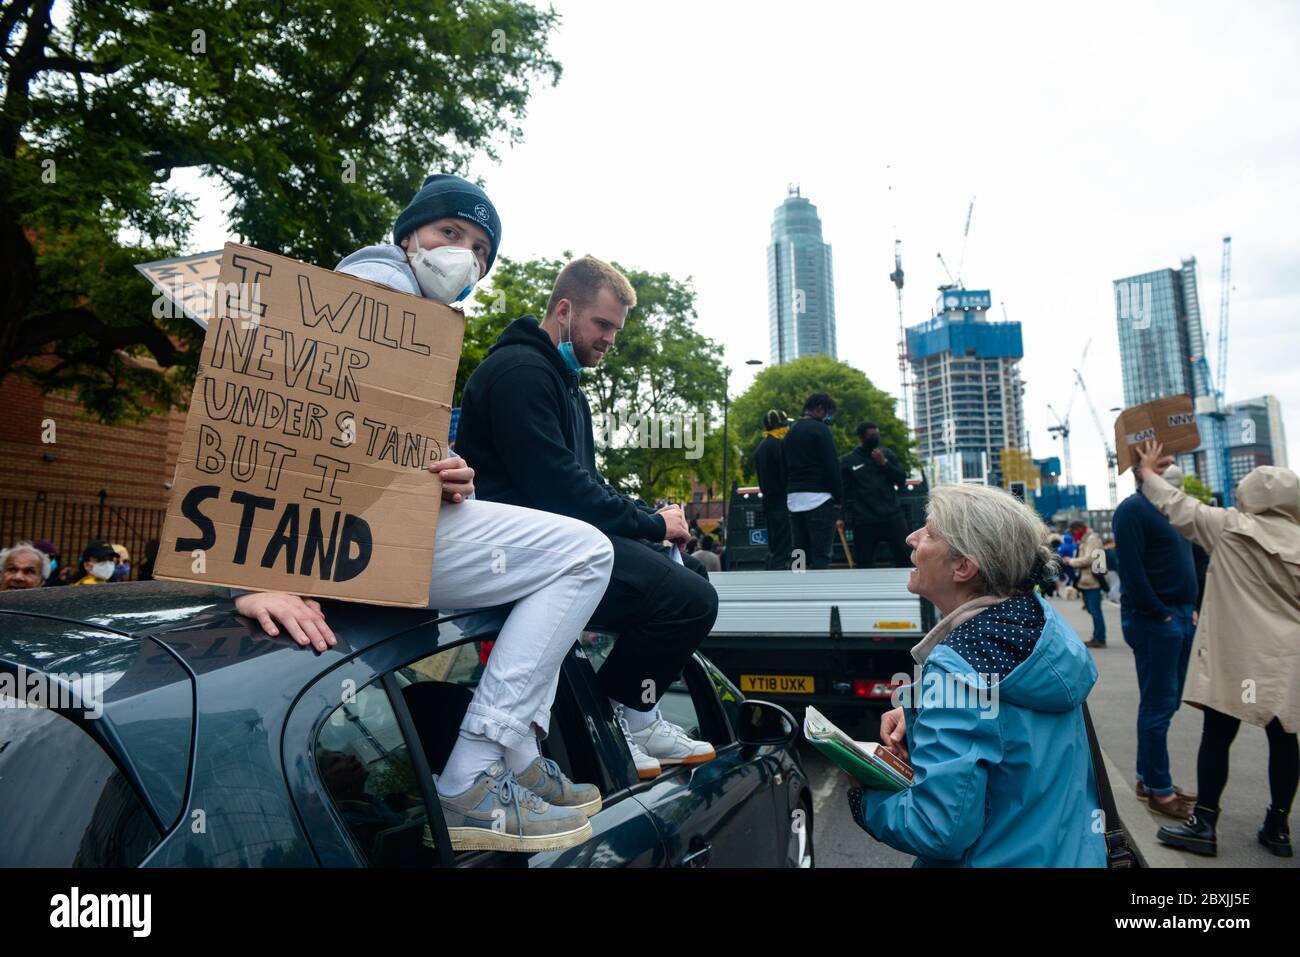 marching for Black Lives Matter , london 7th June 2020, photo Antonio Pagano/Alamy Stock Photo